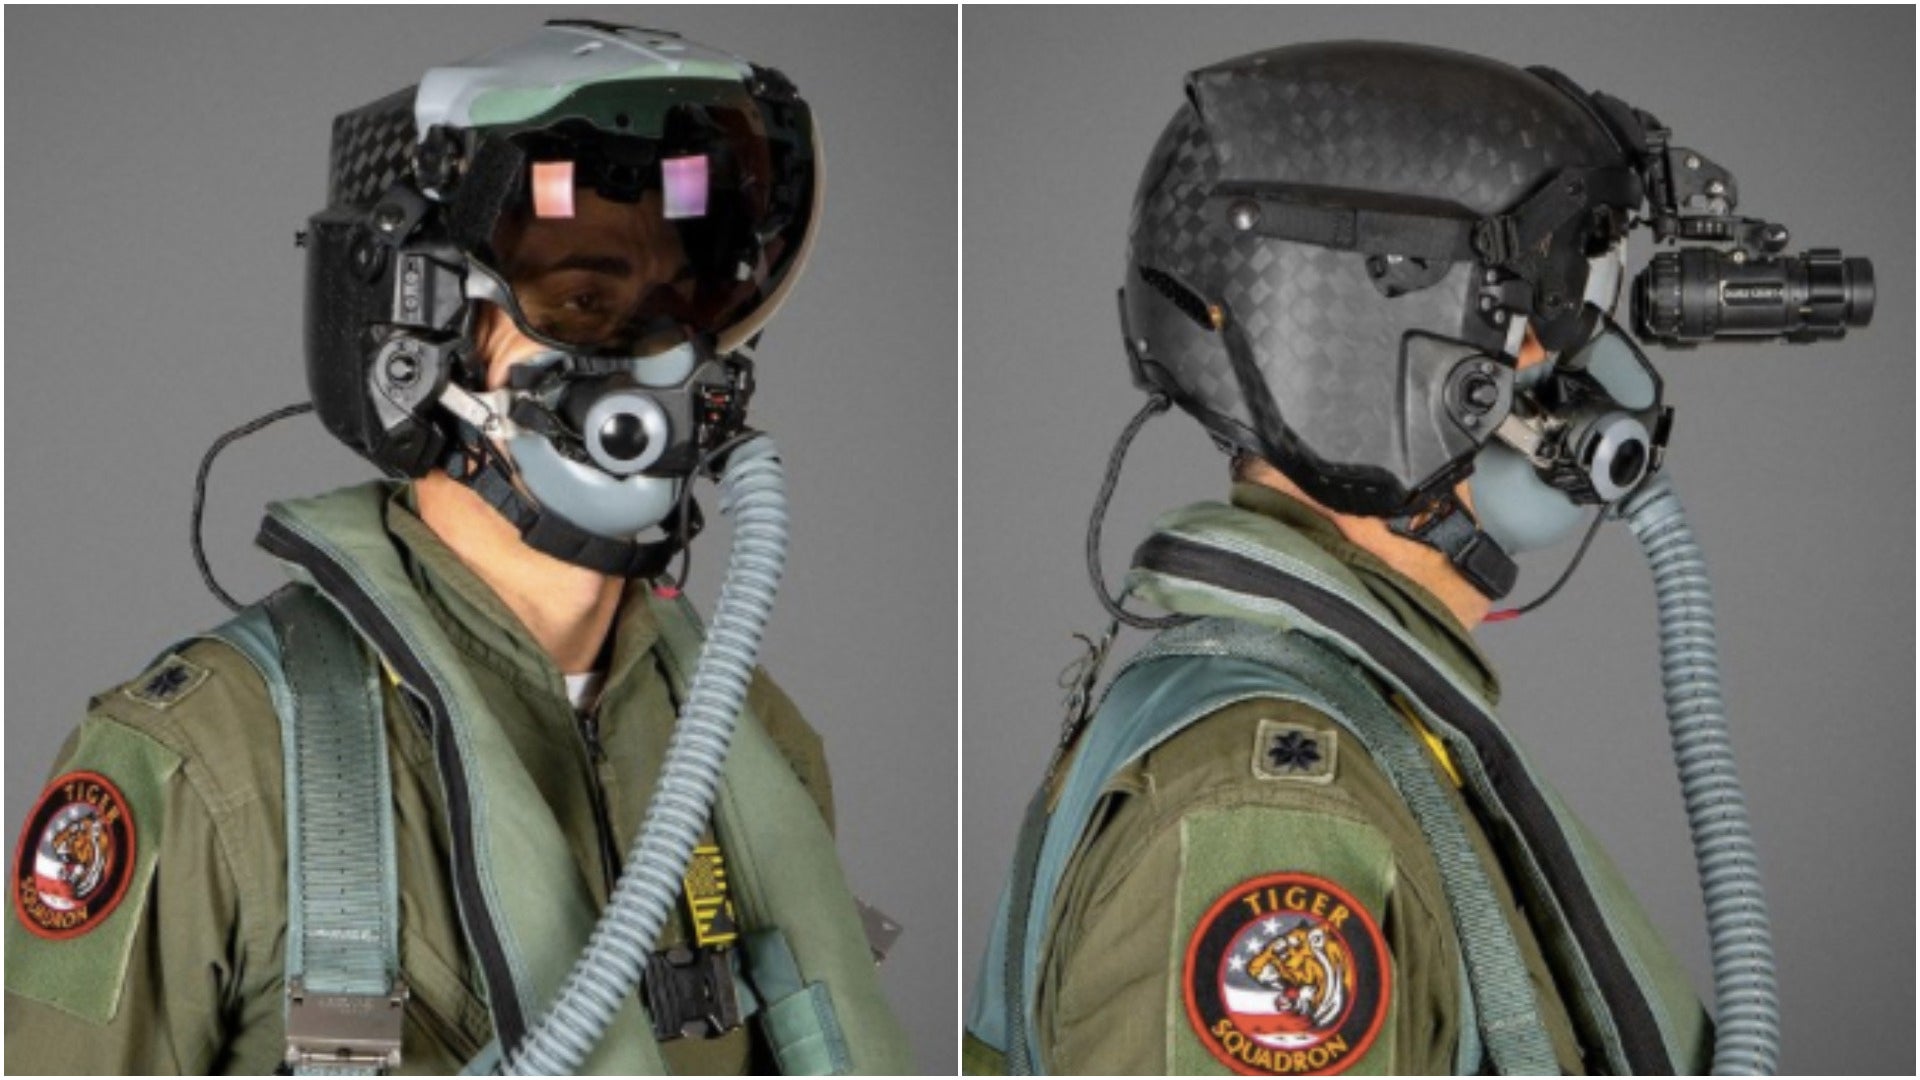 Blame Hare Battleship US Air Force eyes the Next Generation Fixed Wing Helmet for pilots